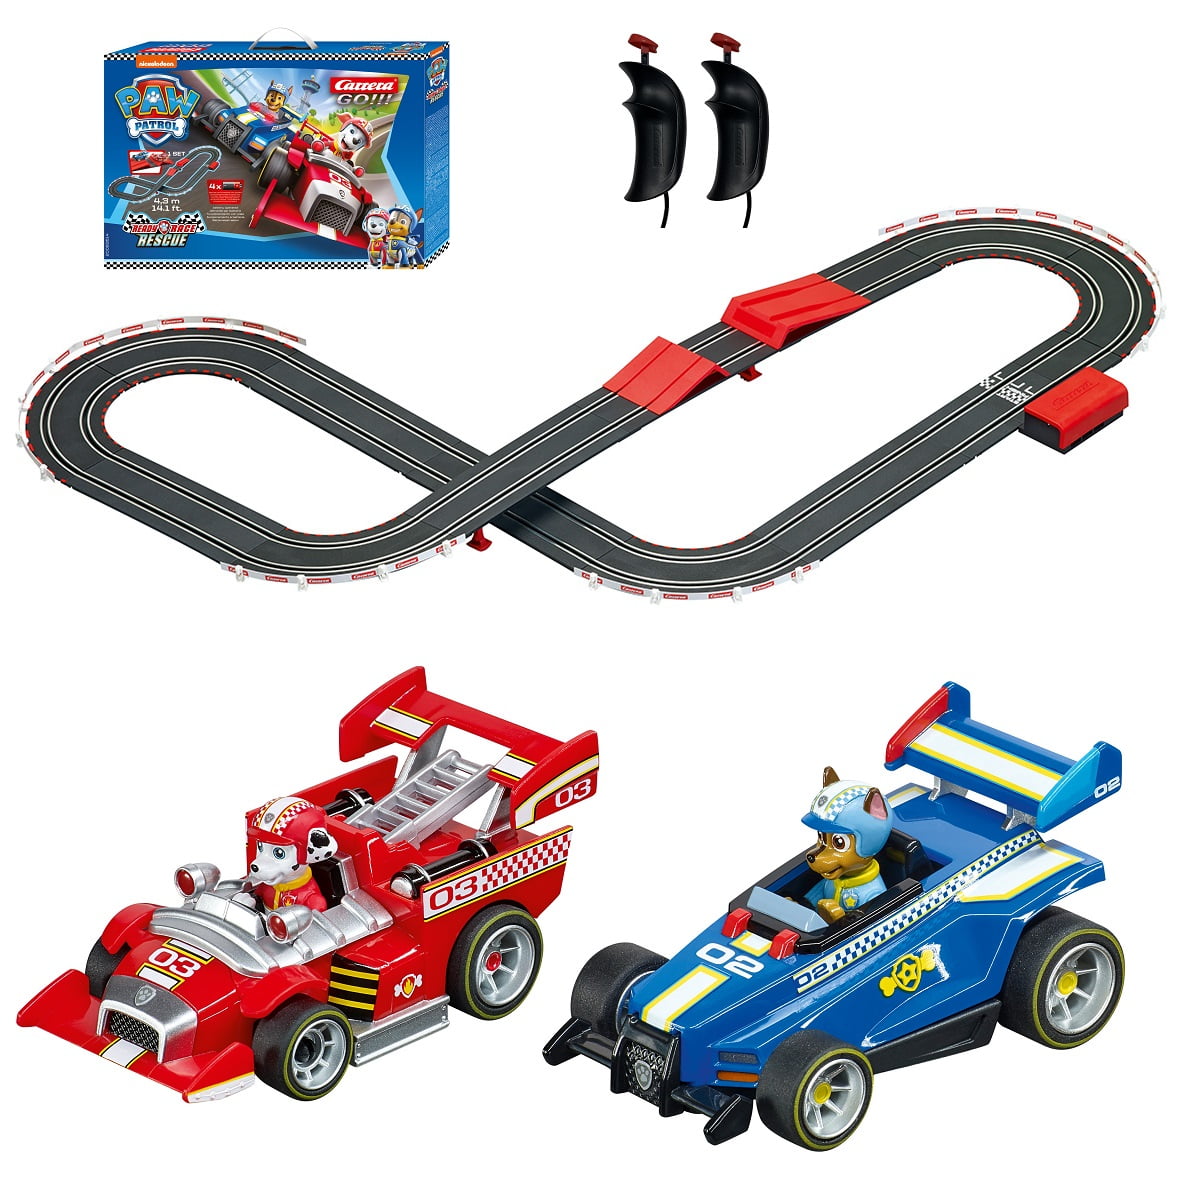 Chase Marshall Slot Car Race Track Includes 2 Cars Carrera First Paw Patrol 